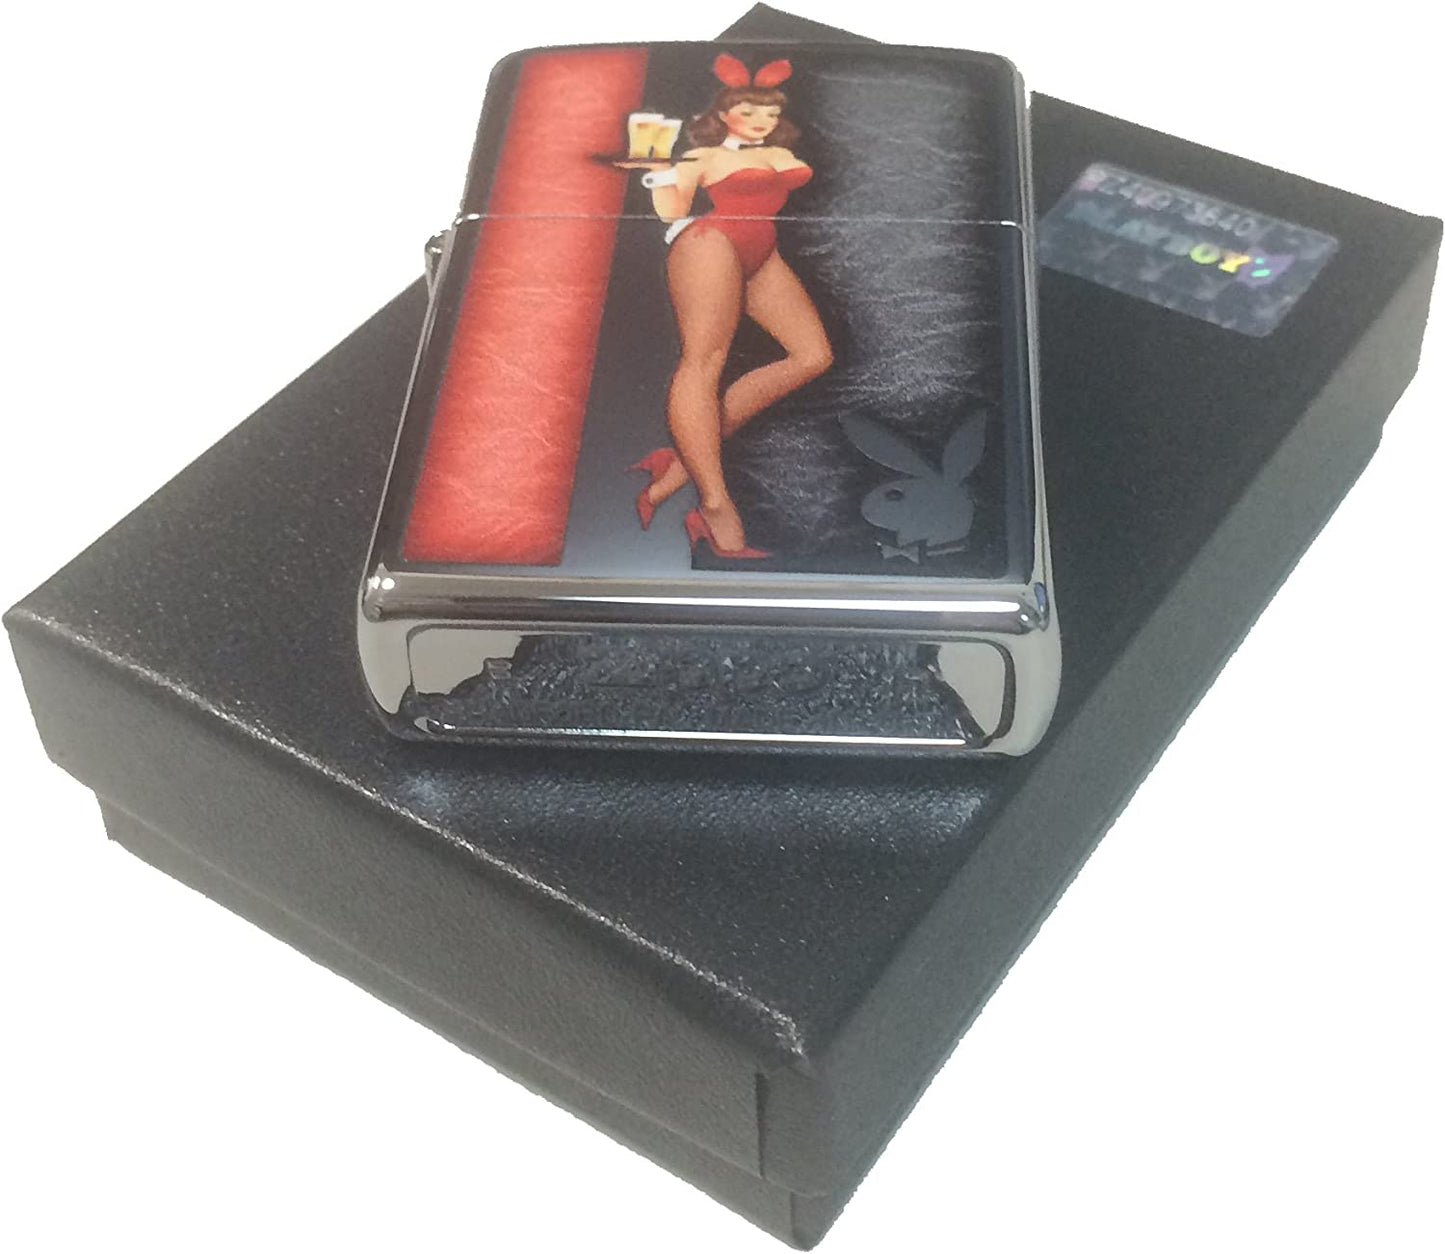 Red Costumed Playboy Cocktail Waitress with Logo - High Polish Chrome Zippo Lighter